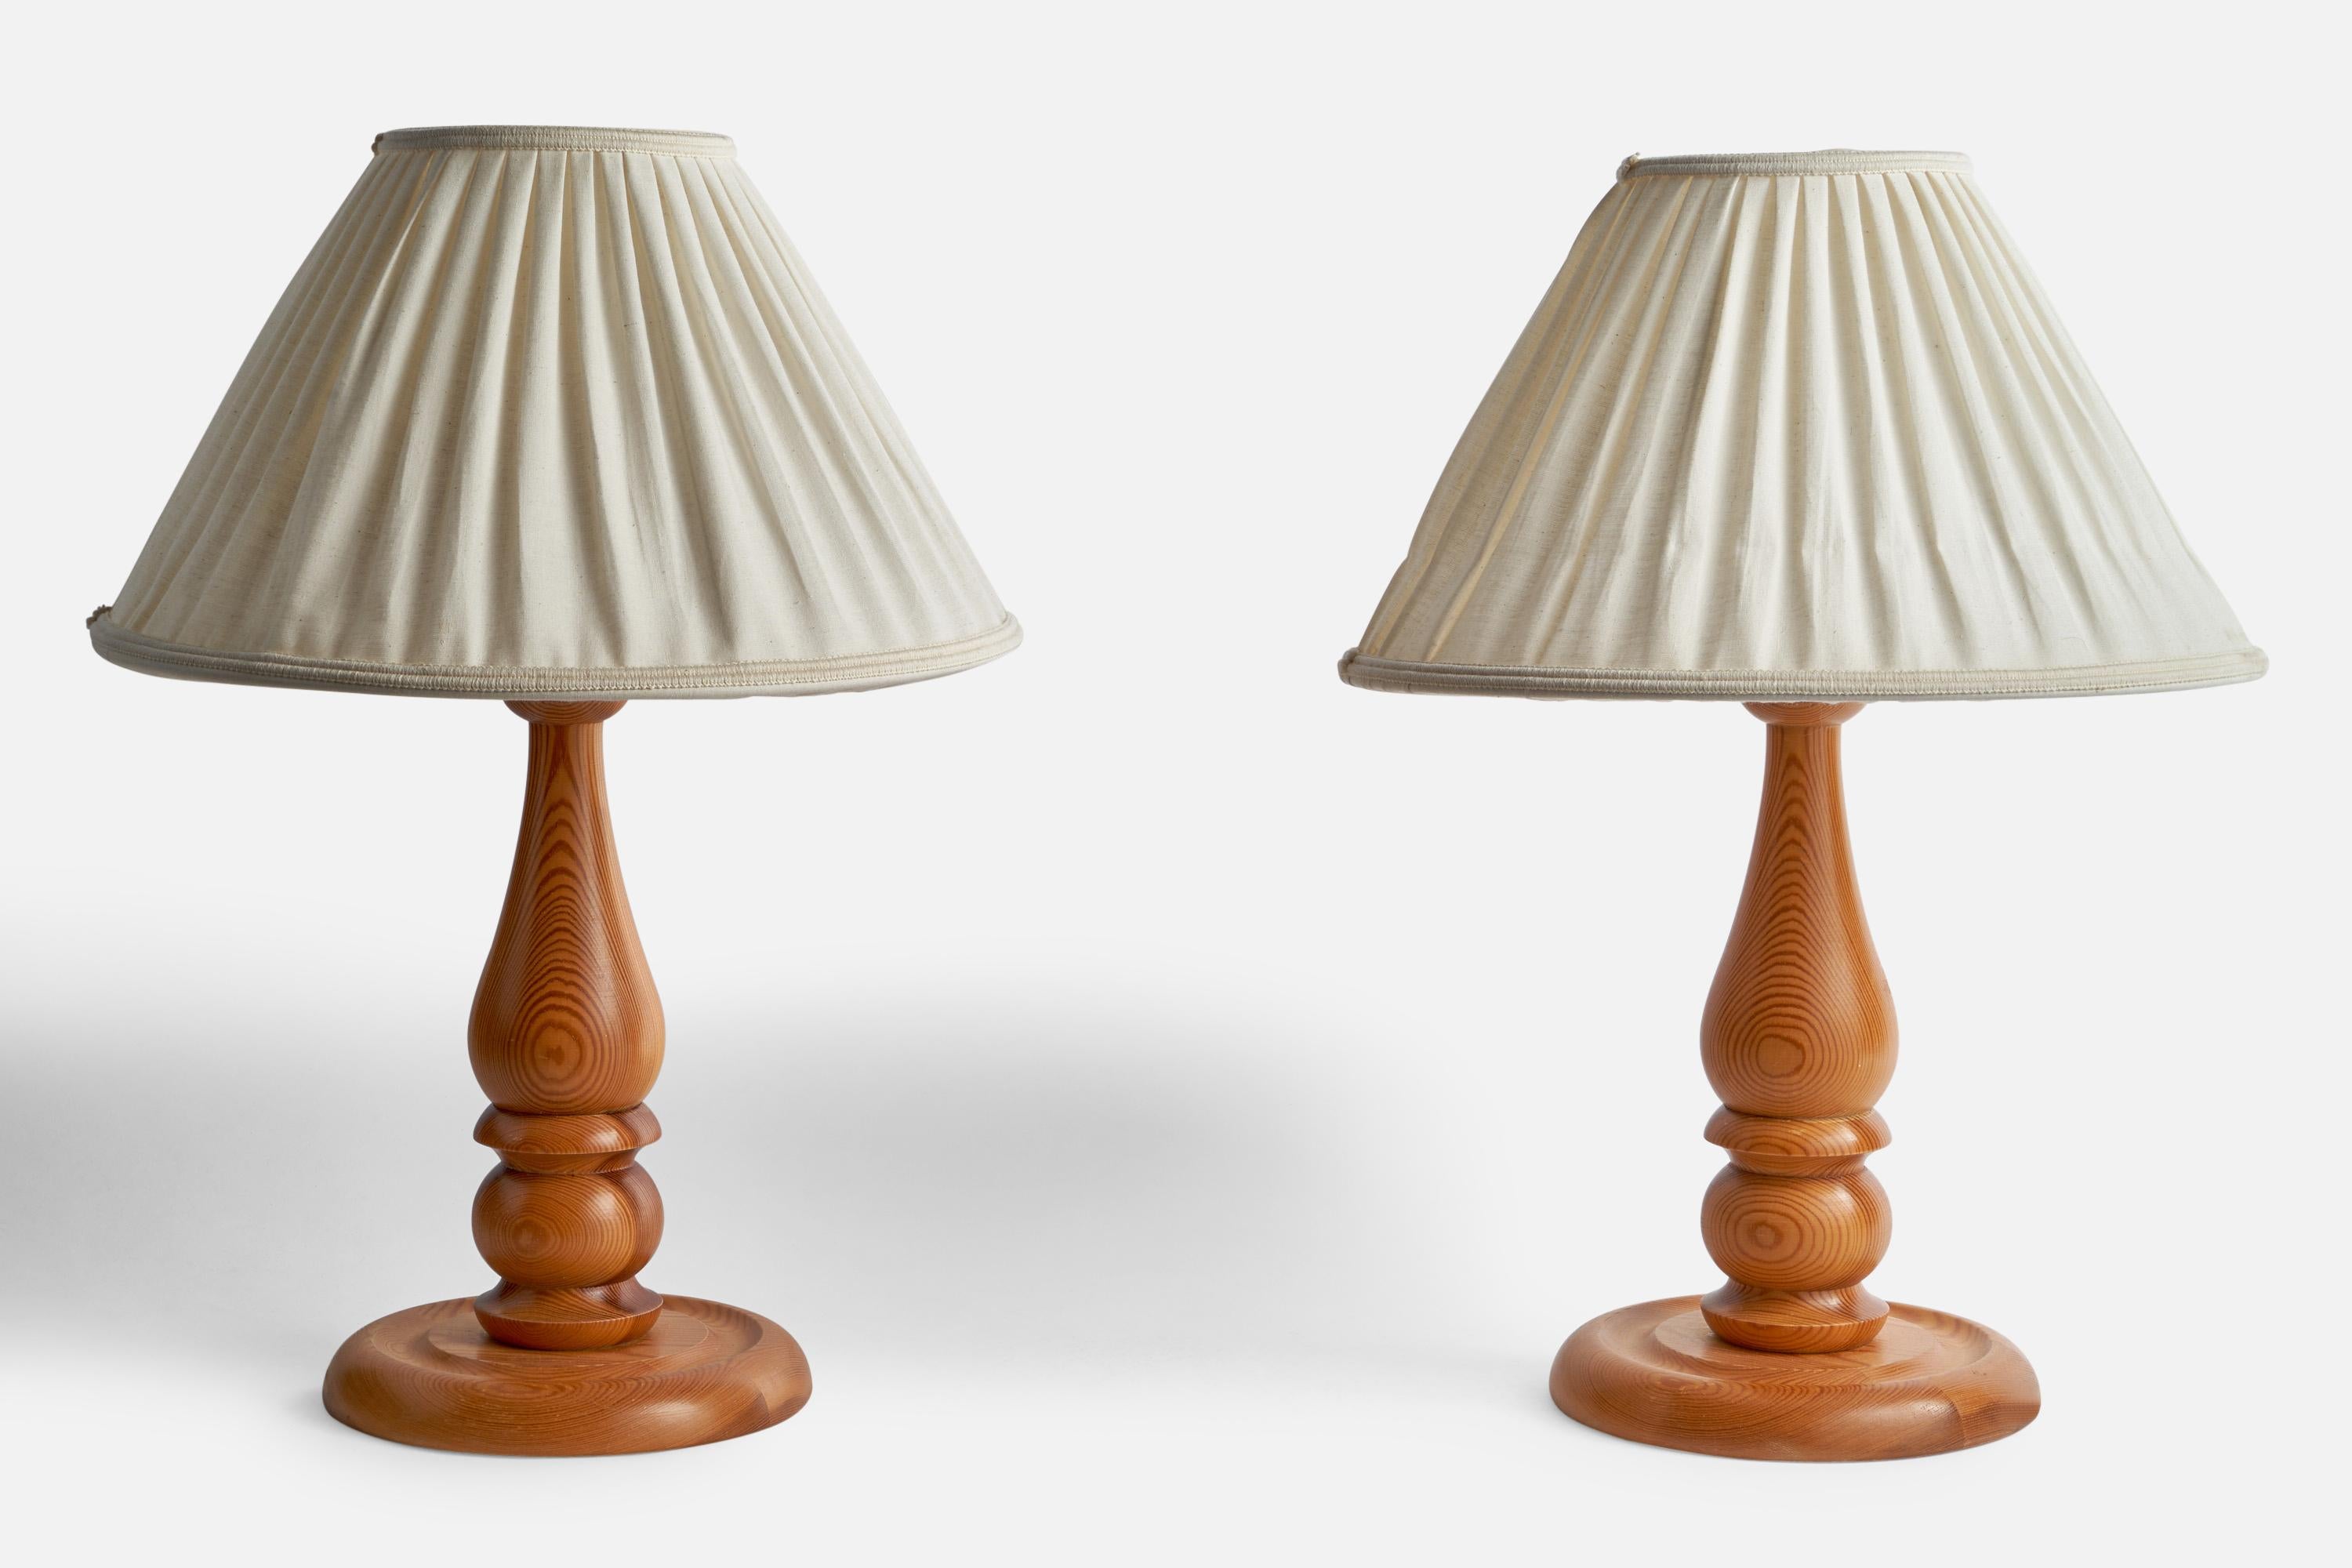 A pair of pine and off-white fabric table lamps designed and produced in Sweden, 1970s.

Overall Dimensions (inches): 20.6” H x 14.5” Diameter
Bulb Specifications: E-26 Bulbs
Number of Sockets: 2
All lighting will be converted for US usage. We is